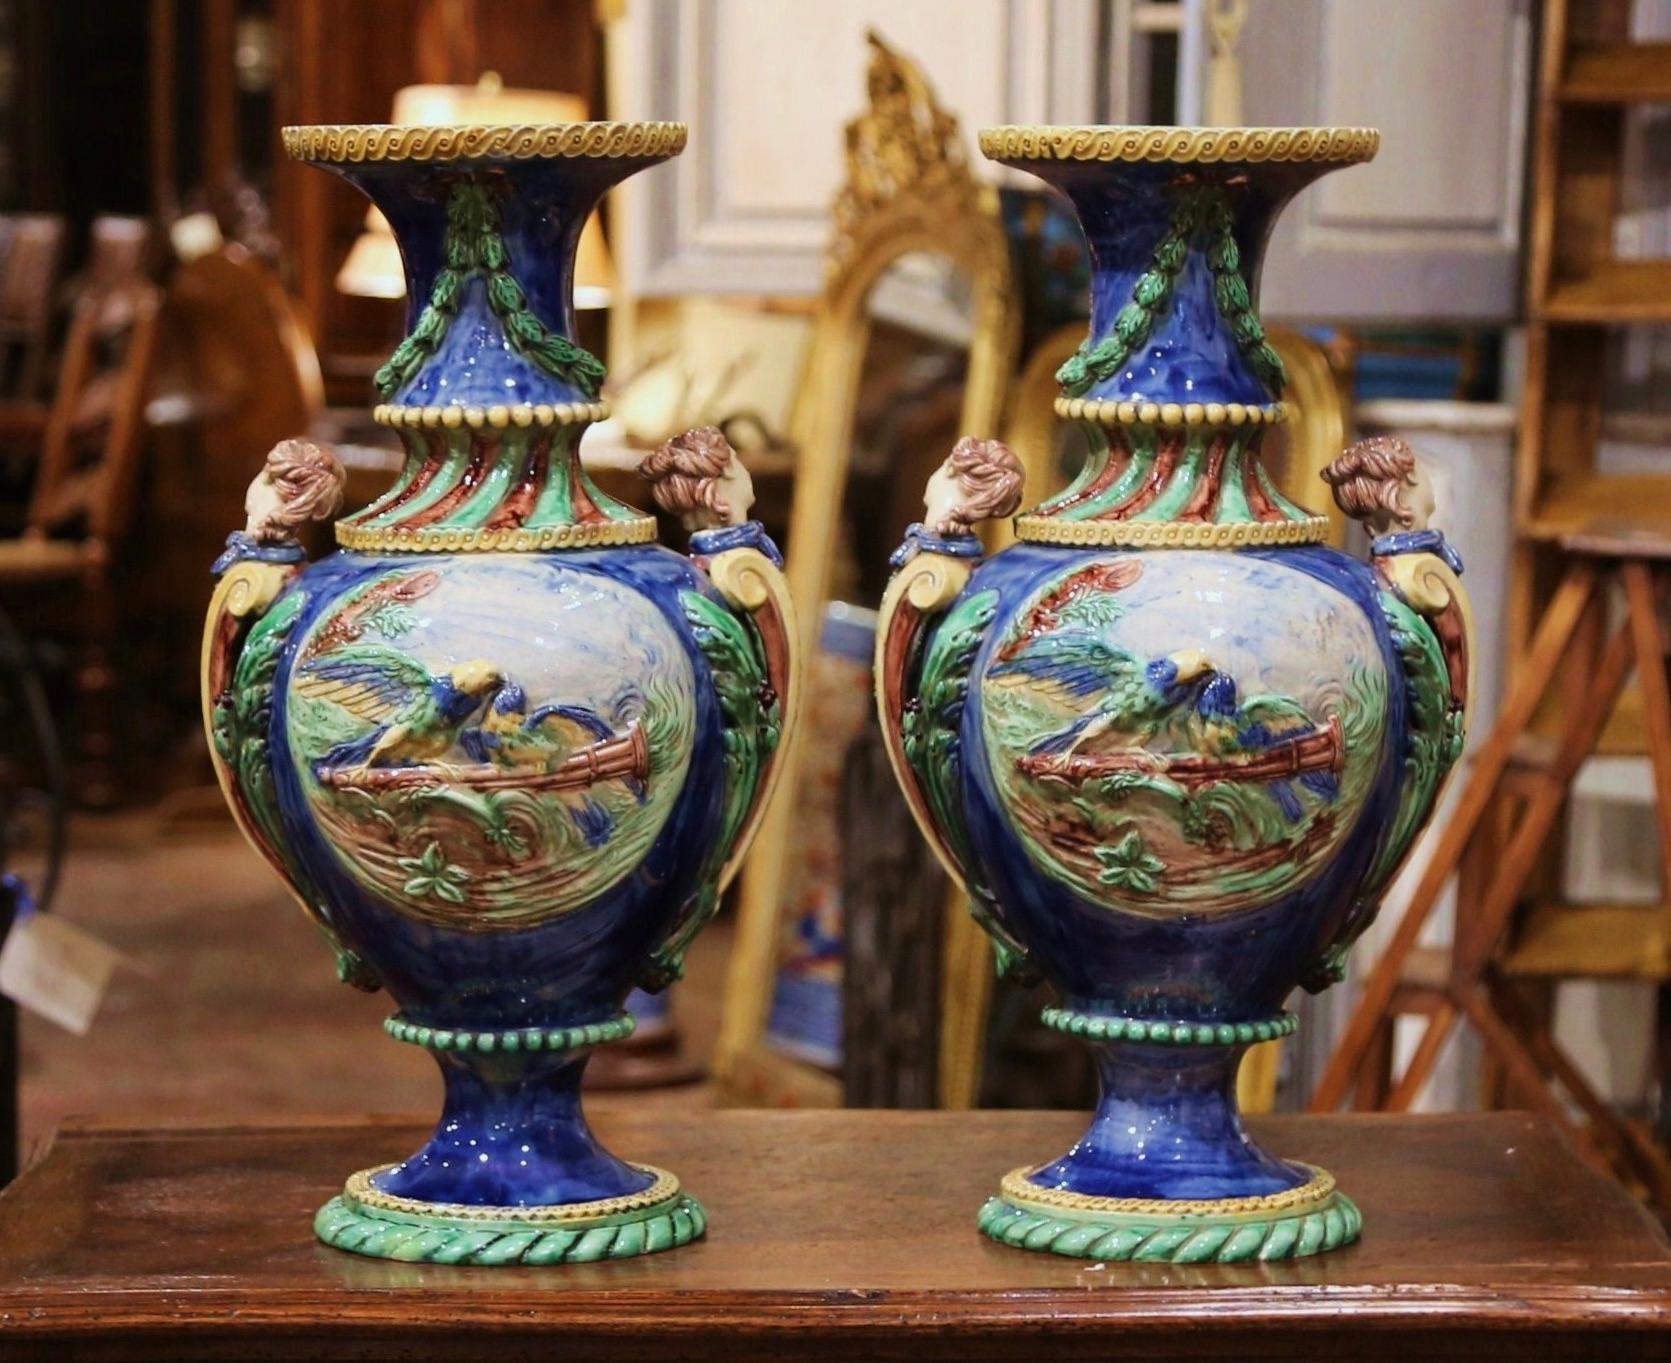 These elegant antique Majolica vases were crafted in France, circa 1870. Attributed to the French artist Thomas Sergent (1830-1890), each tall vessel dressed with carved woman figure handles, stands on a round base and features high relief